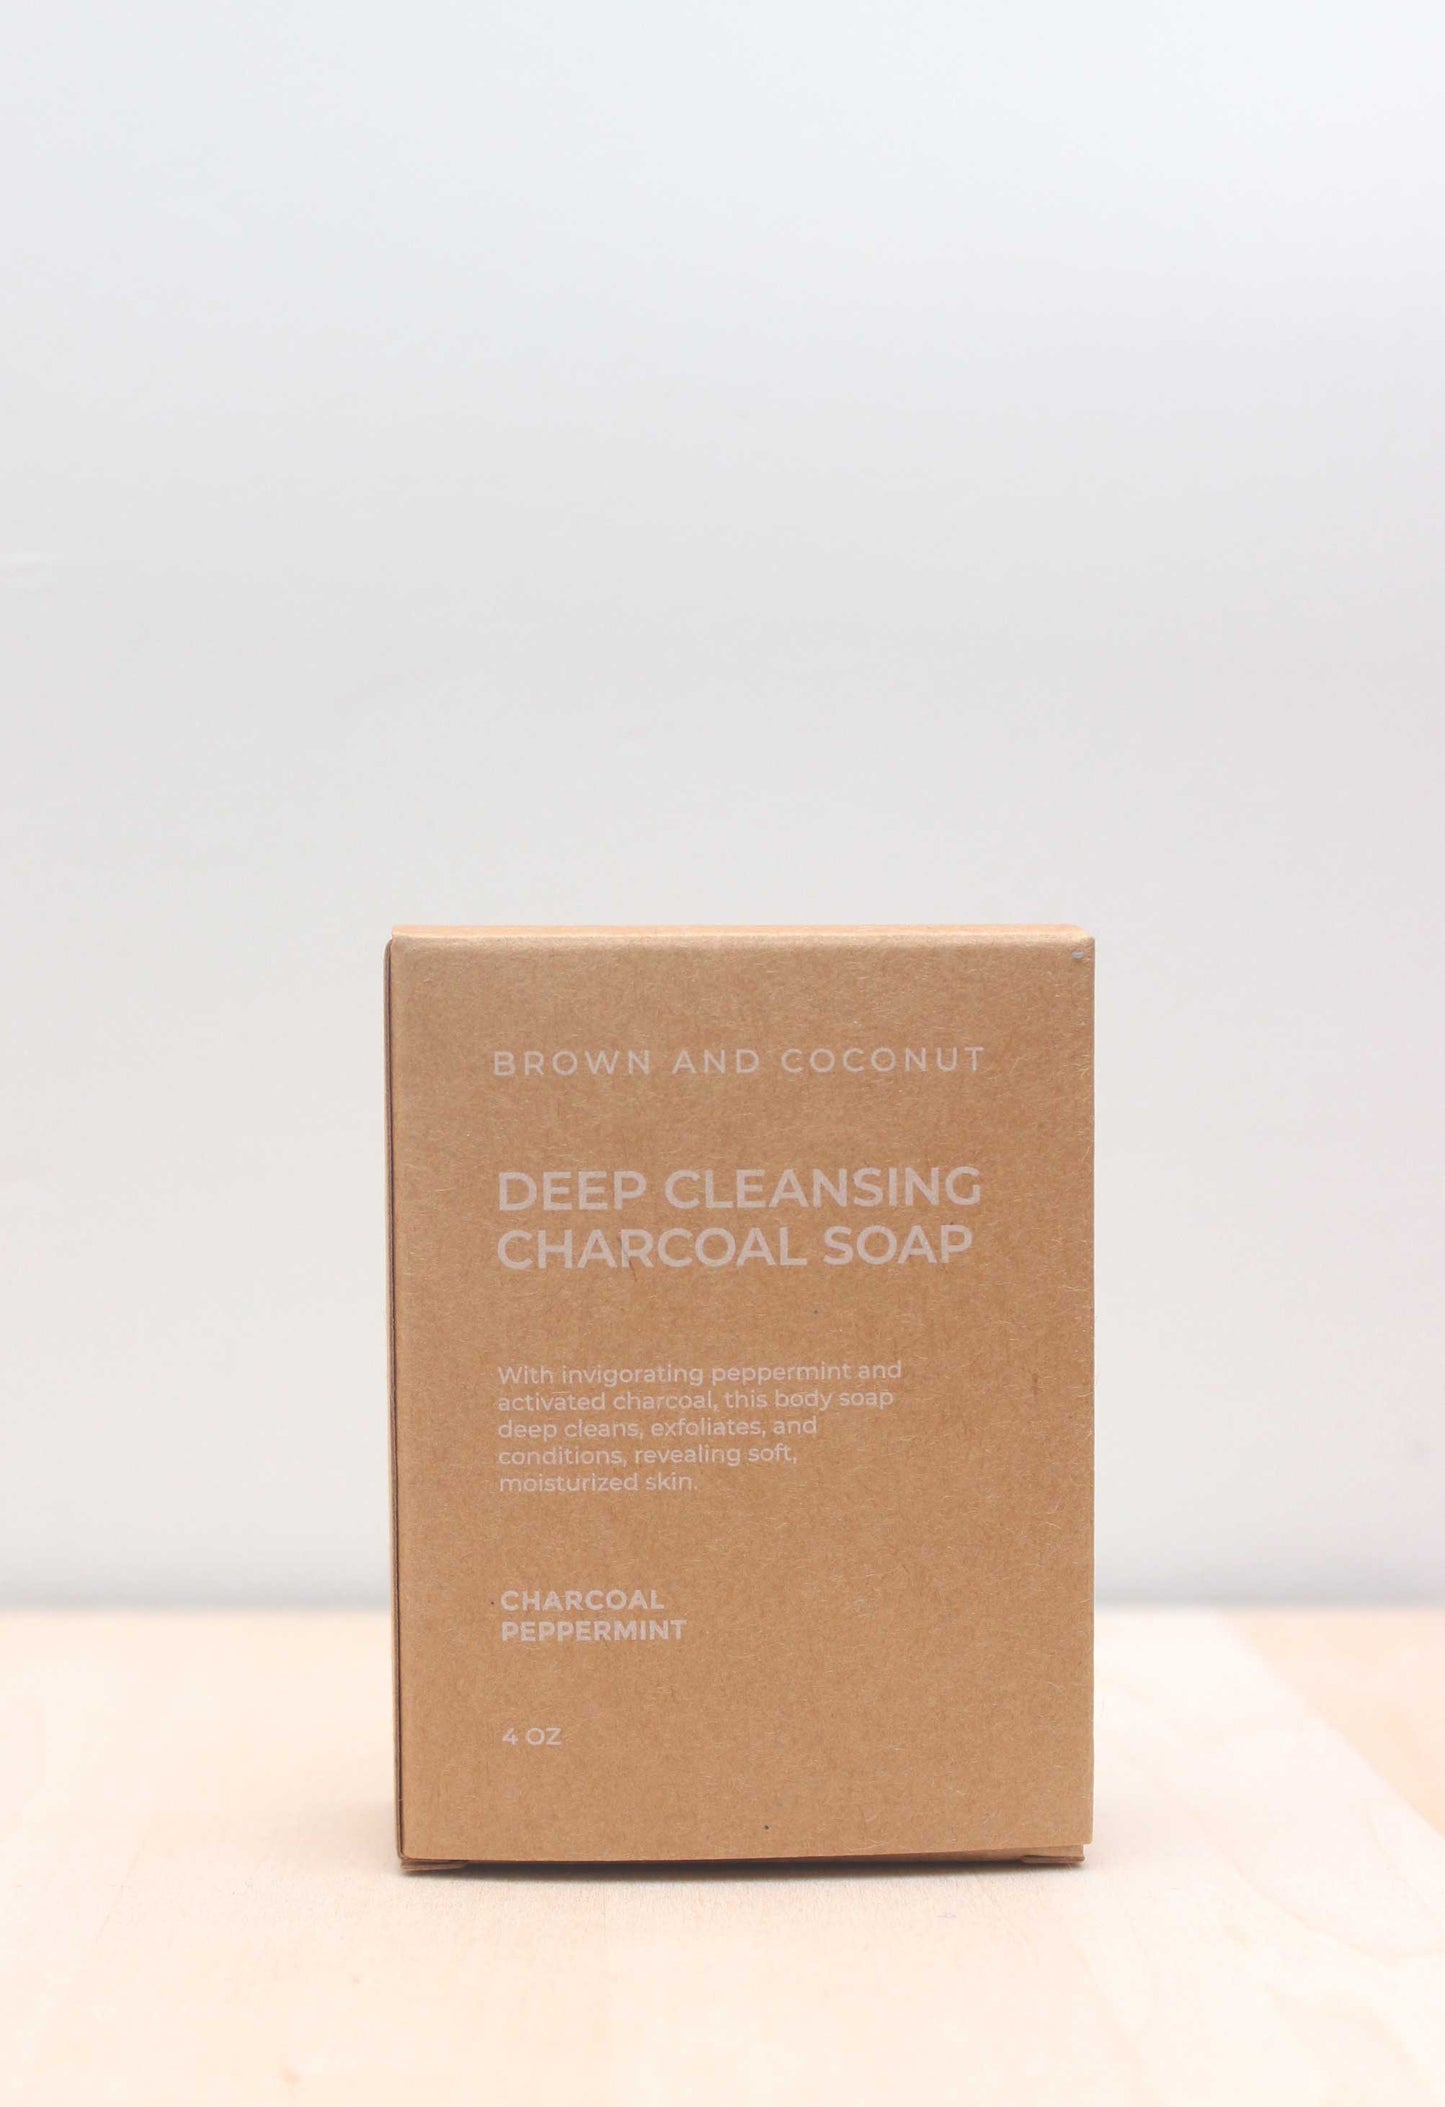 Deep Cleansing Charcoal Soap